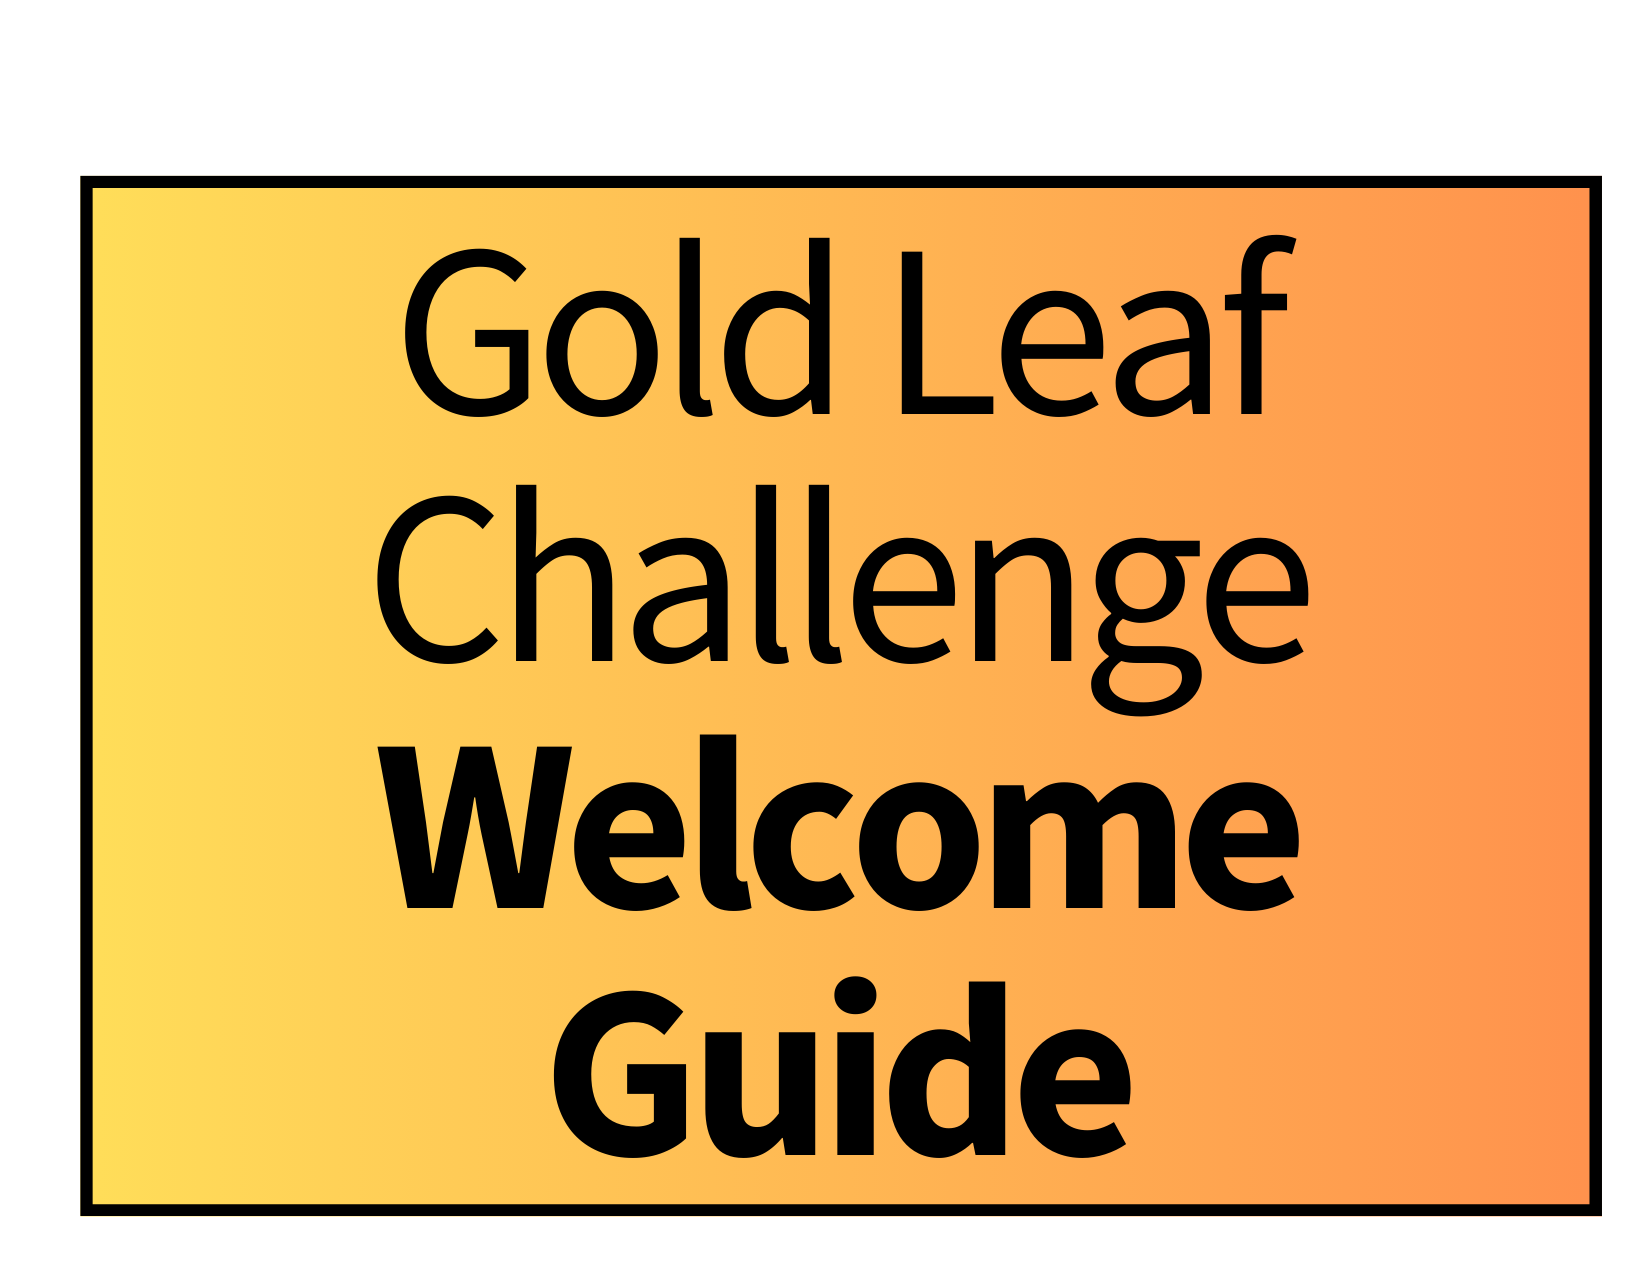 Gold Leaf Challenge Welcome Guide